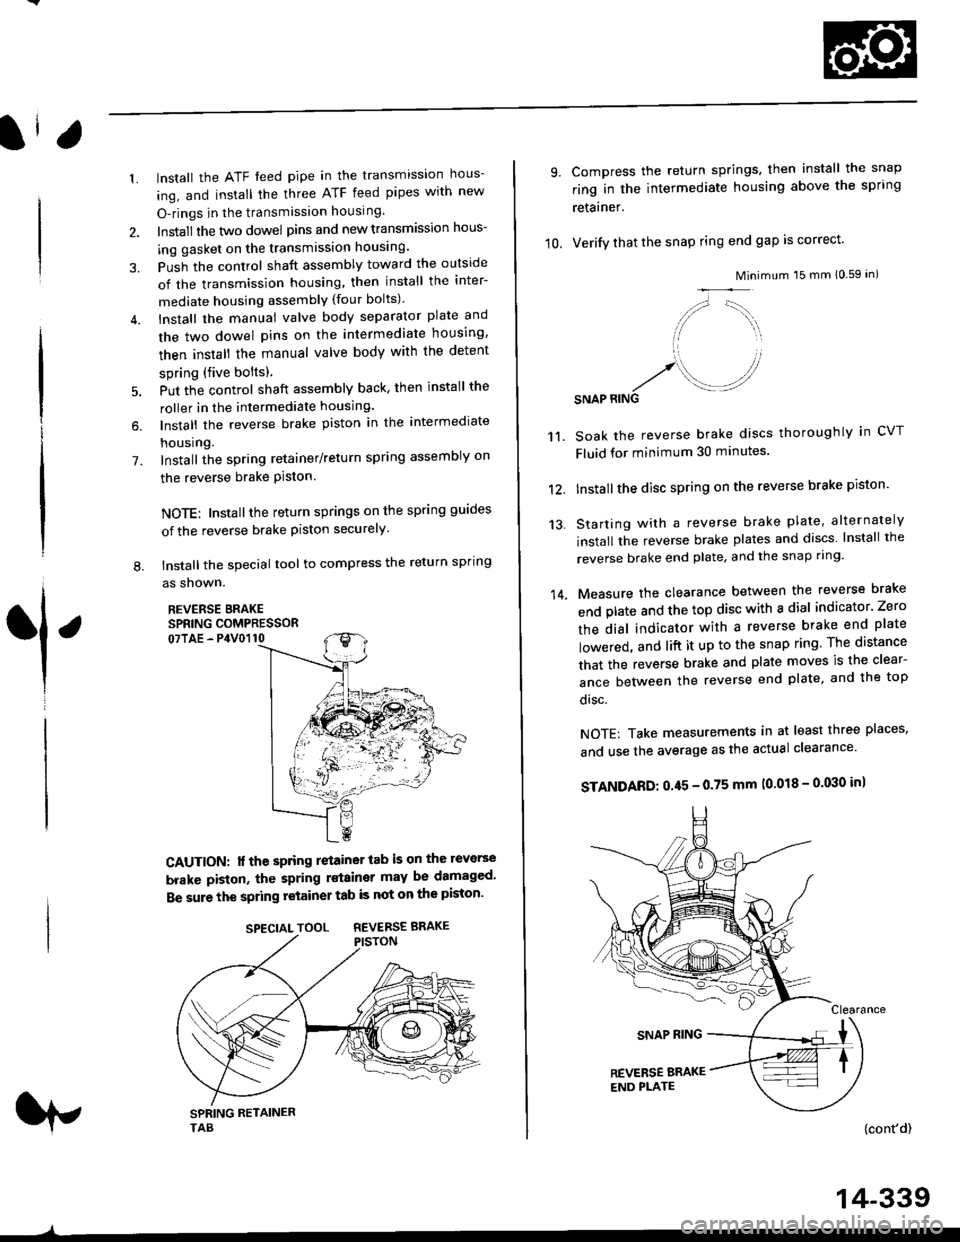 HONDA CIVIC 1998 6.G Workshop Manual 1.
7.
lnstall the ATF feed pipe in the transmission hous-
ing, and install the three ATF feed pipes with new
O-rings in the transmission housing,
Install the two dowel pins and new transmission hous-
